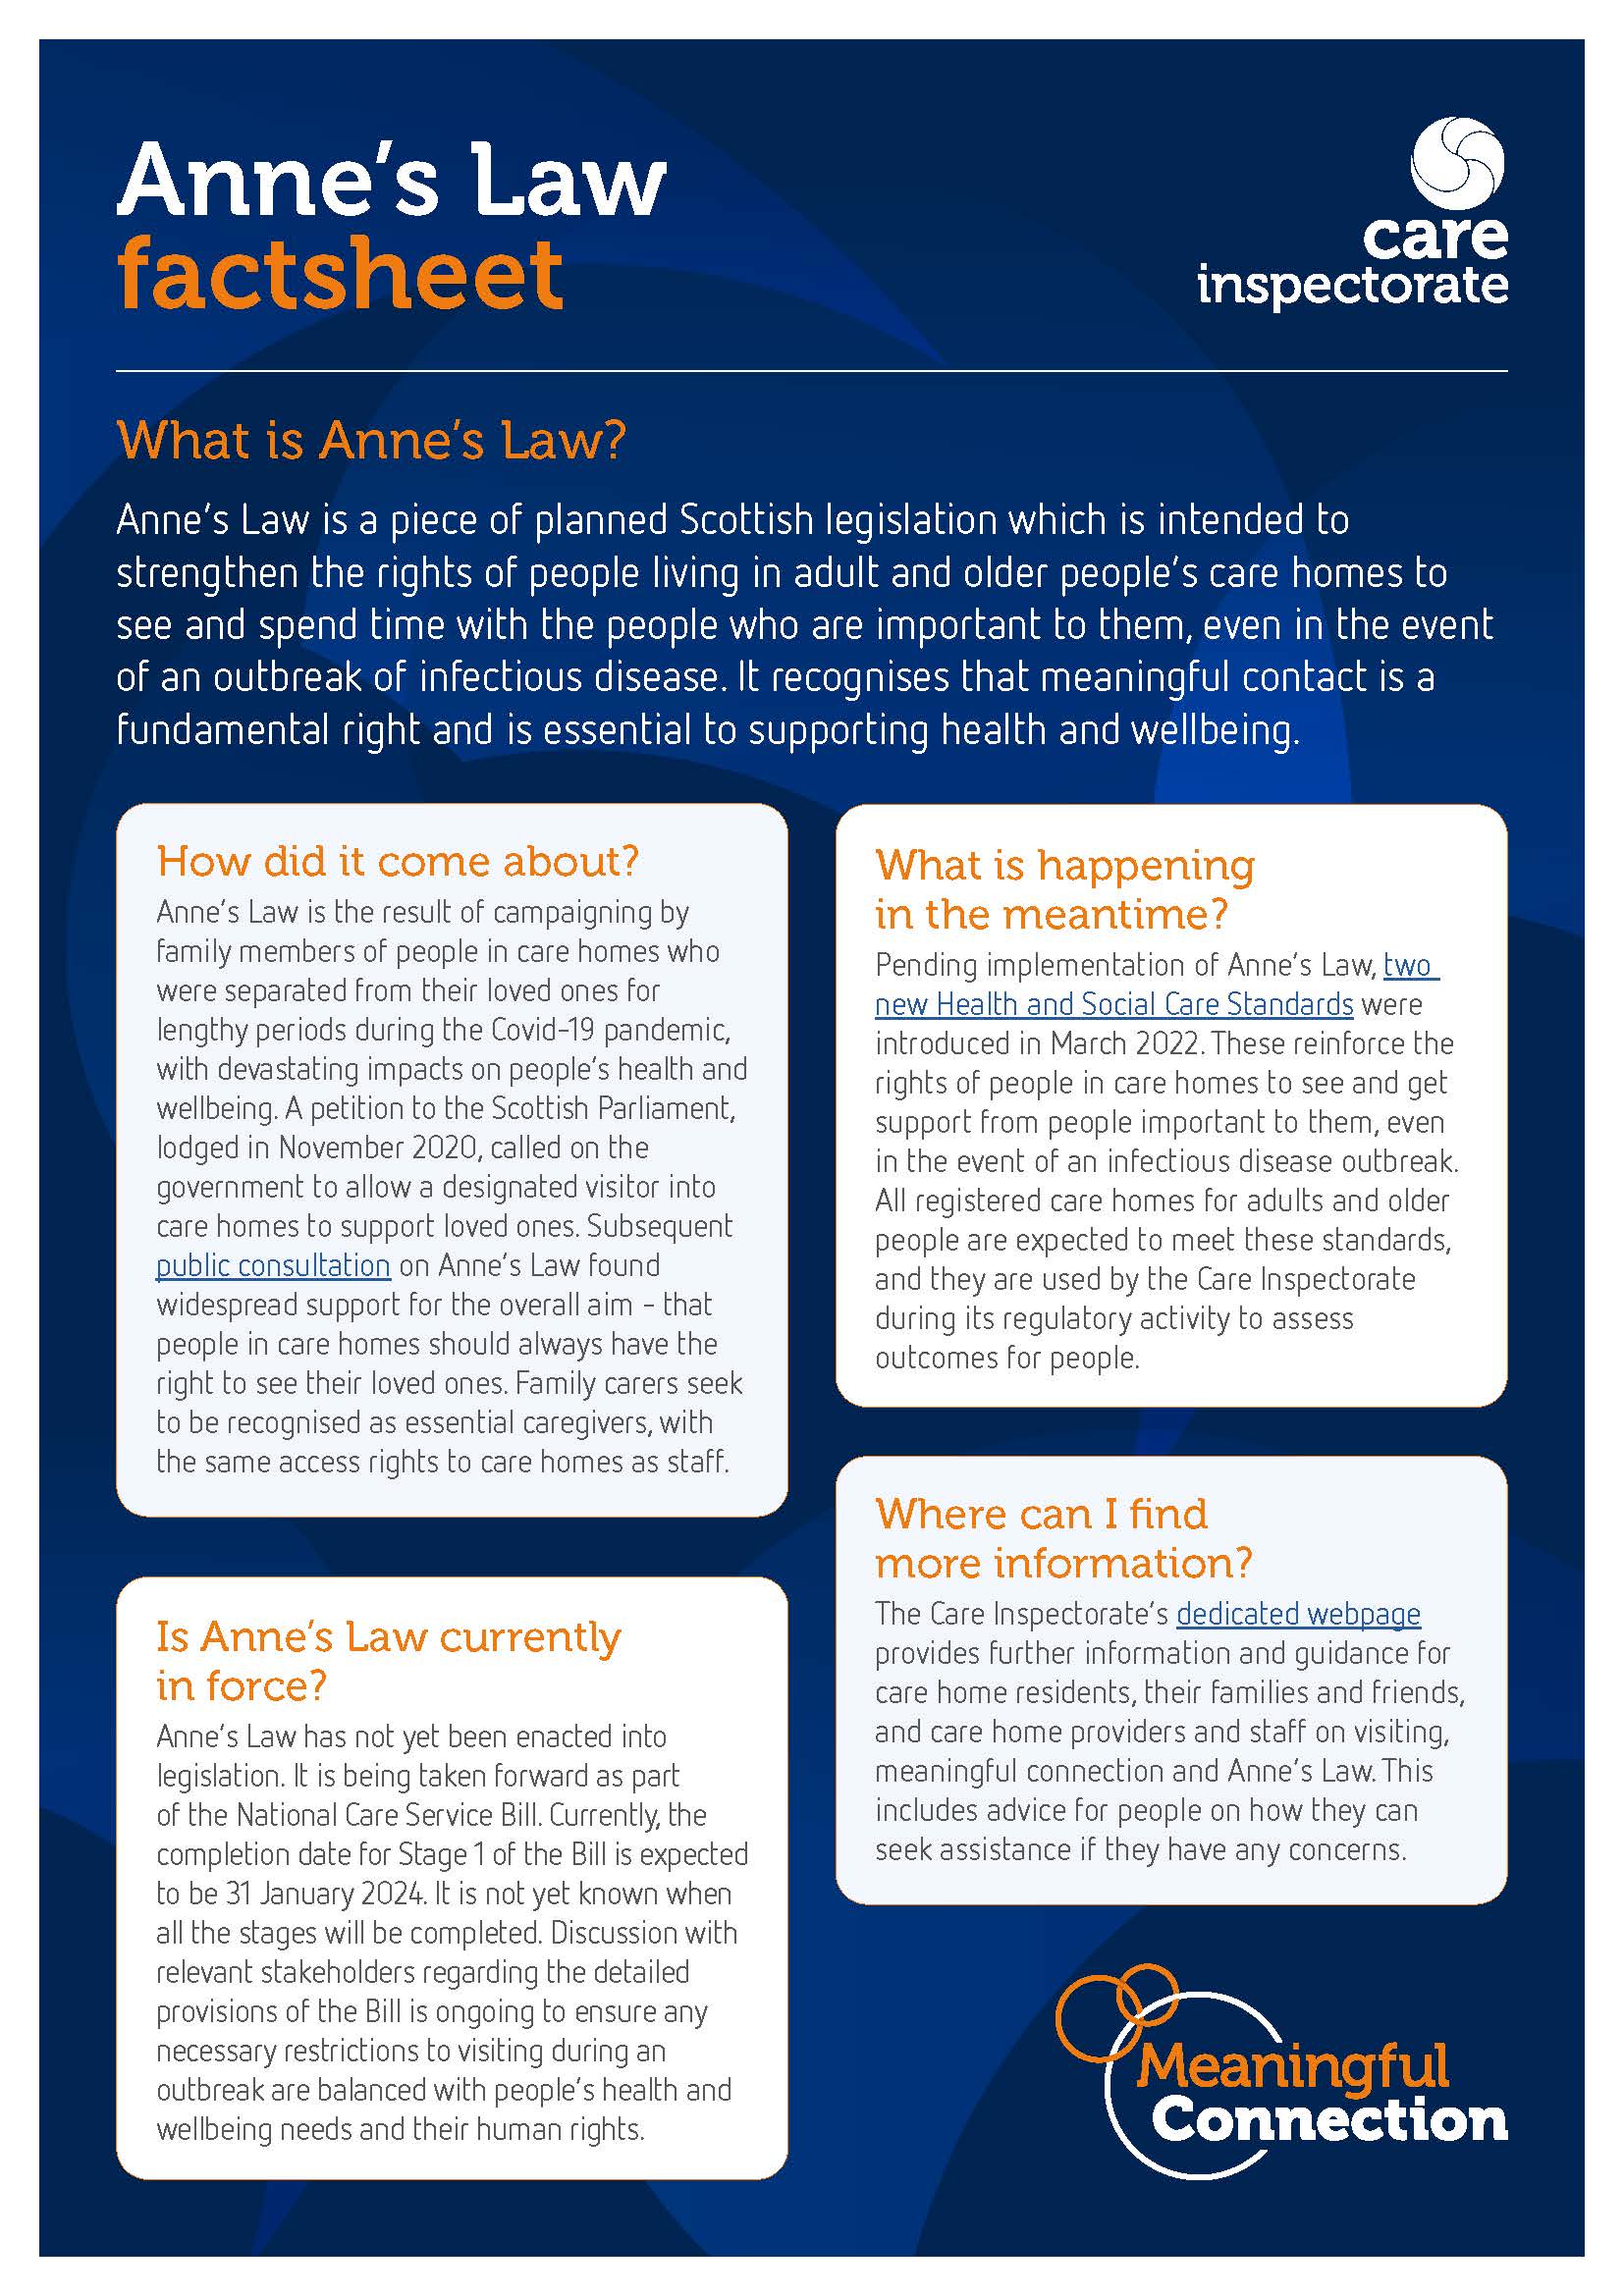 Annes_law_project_-_Fact_sheet_002.jpg